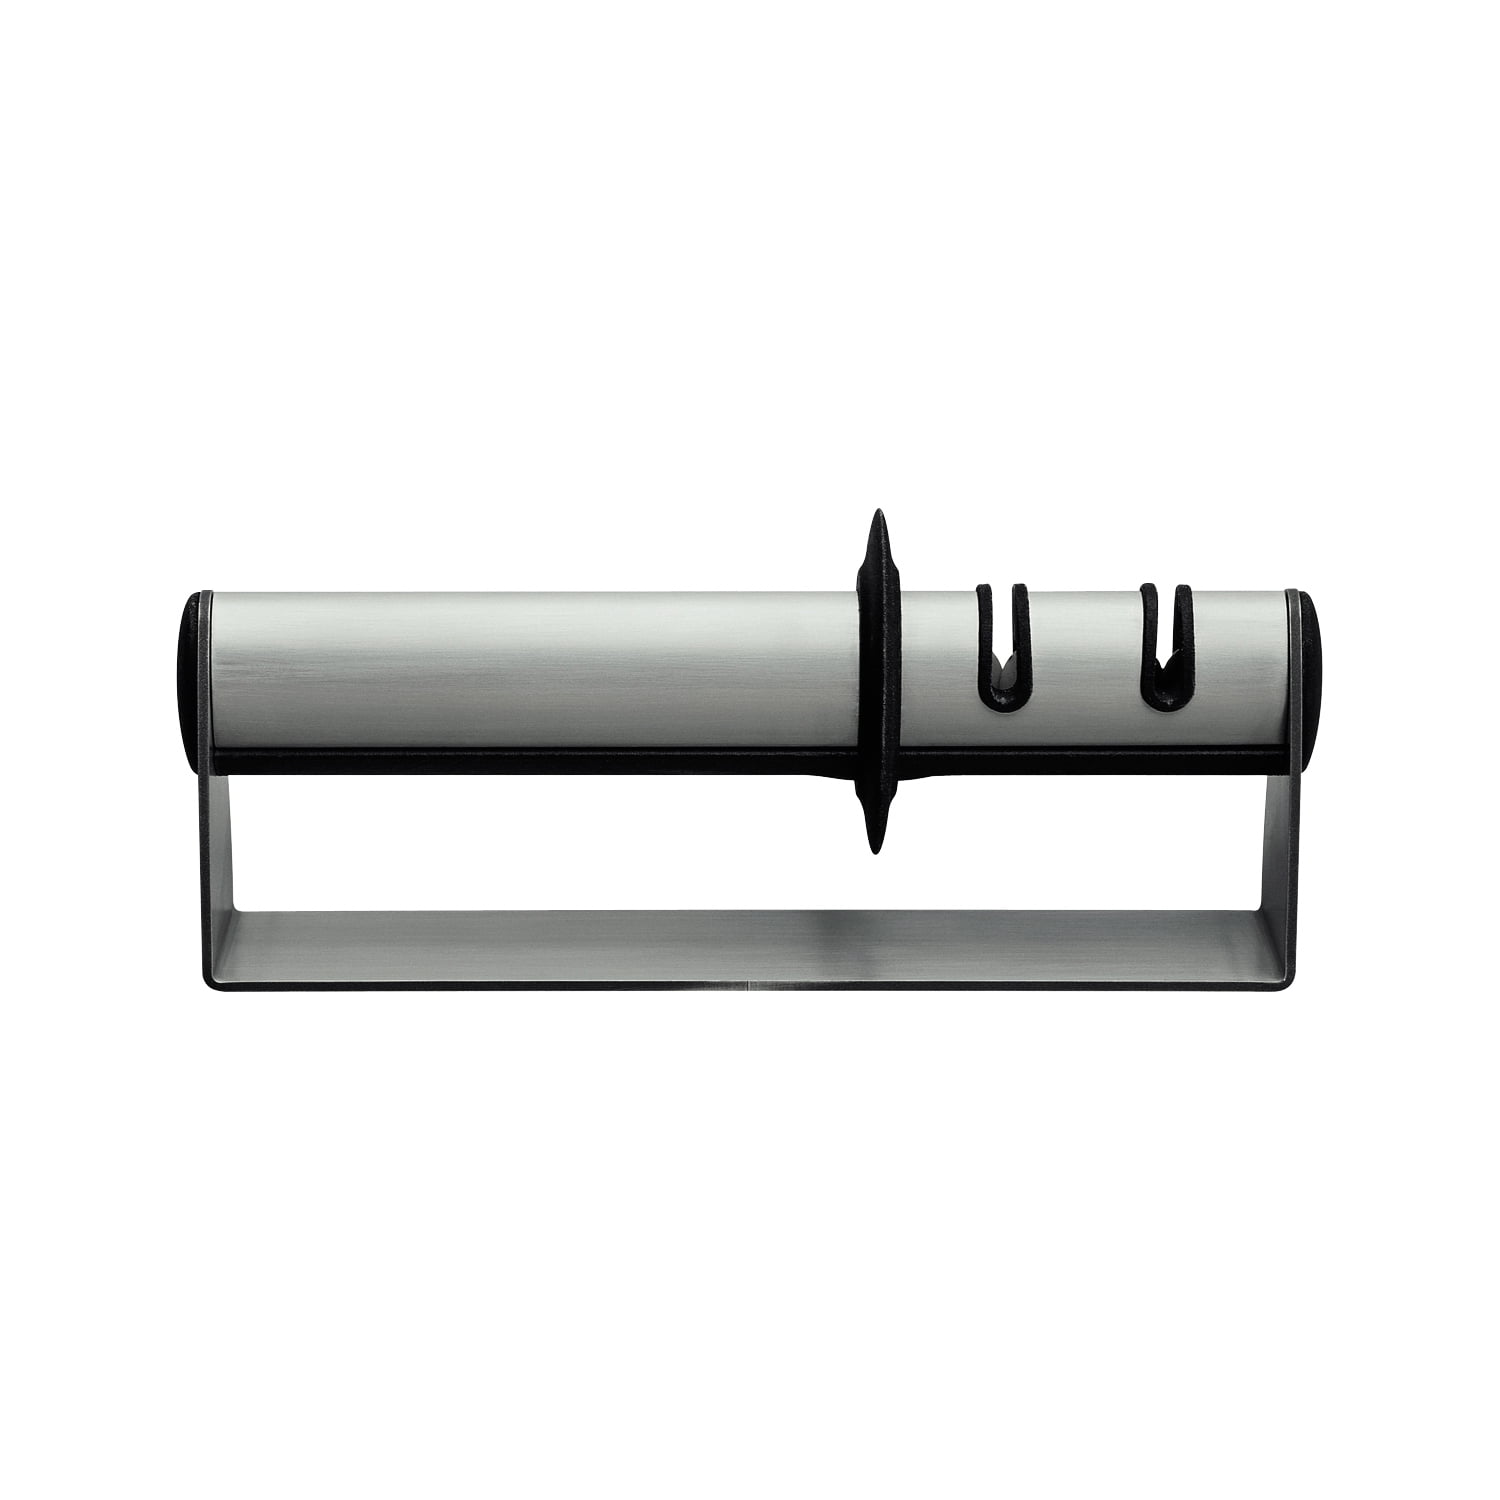 Zwilling Two-Stage Pull-Through Sharpener-Gray